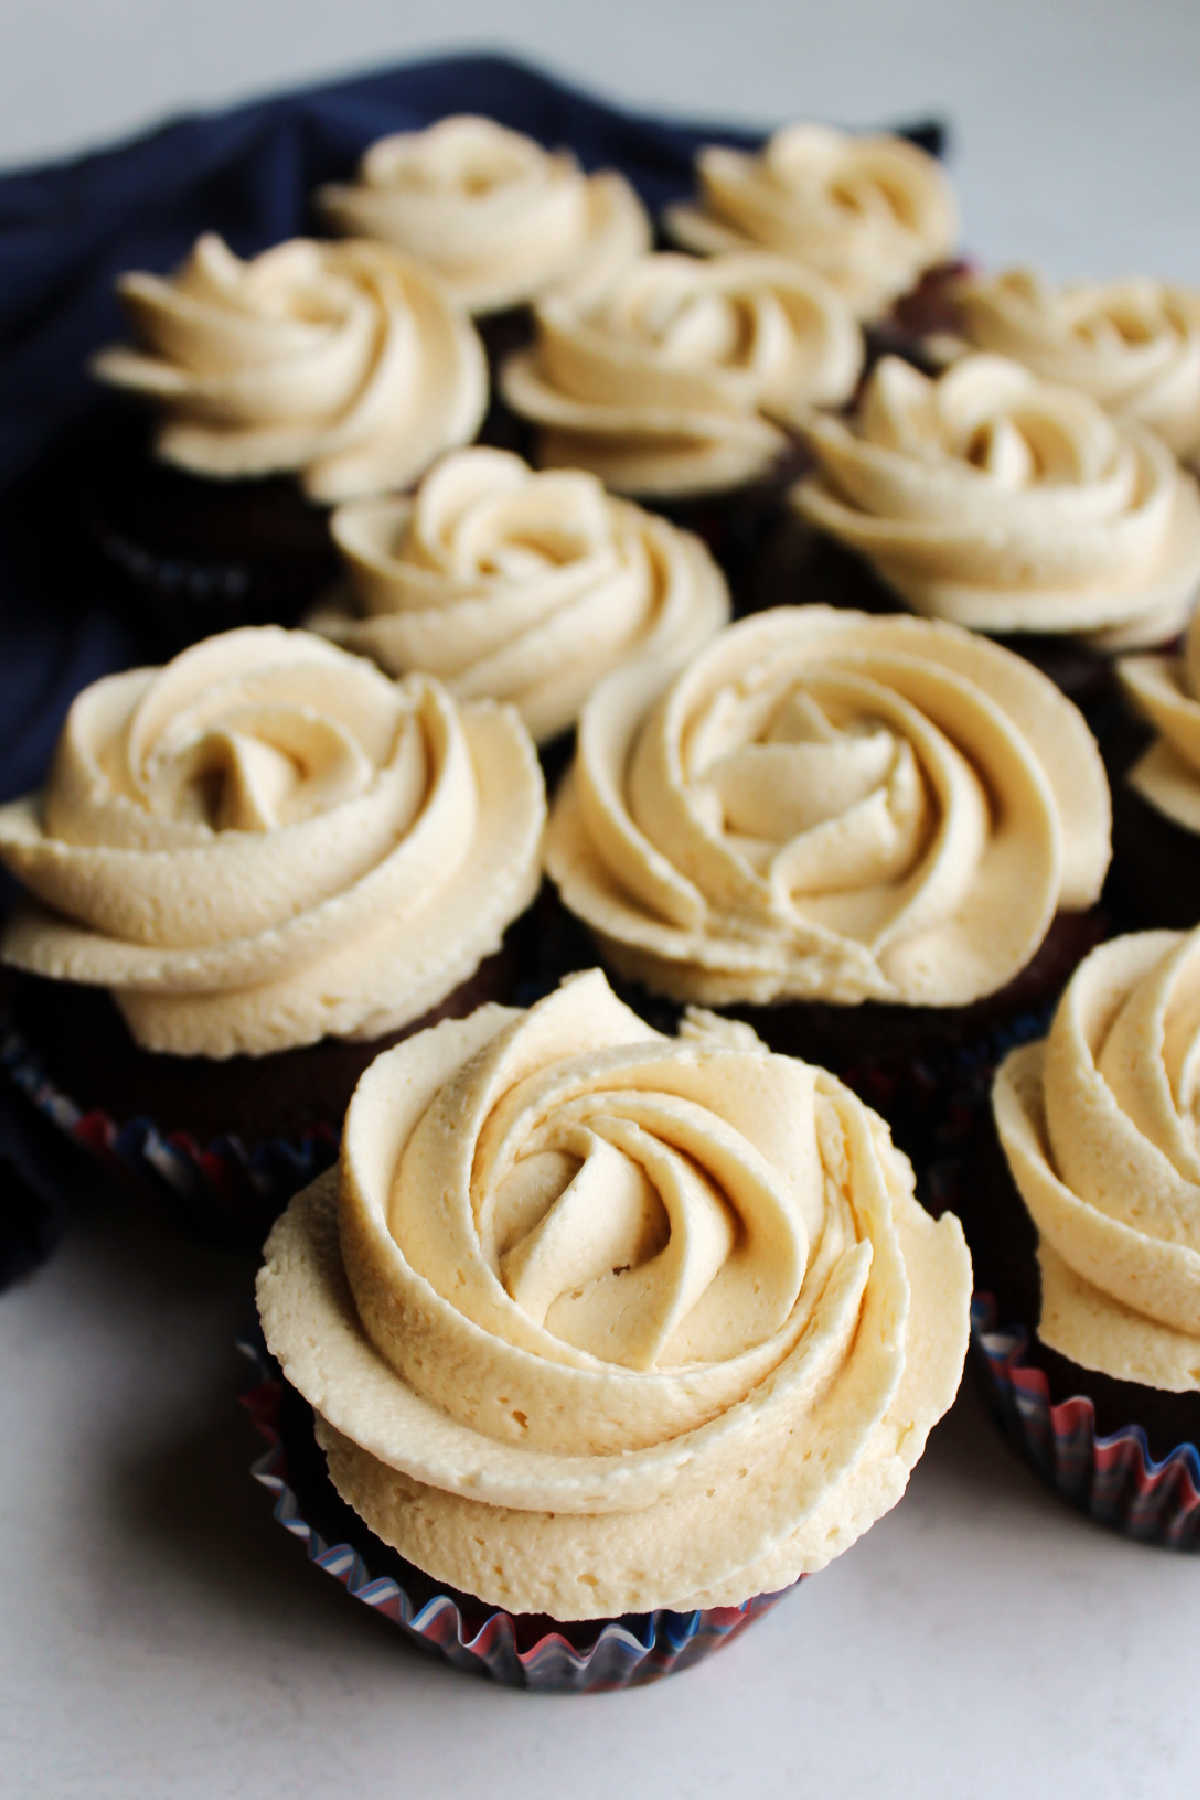 Chocolate cupcakes topped with brown sugar buttercream rosettes.